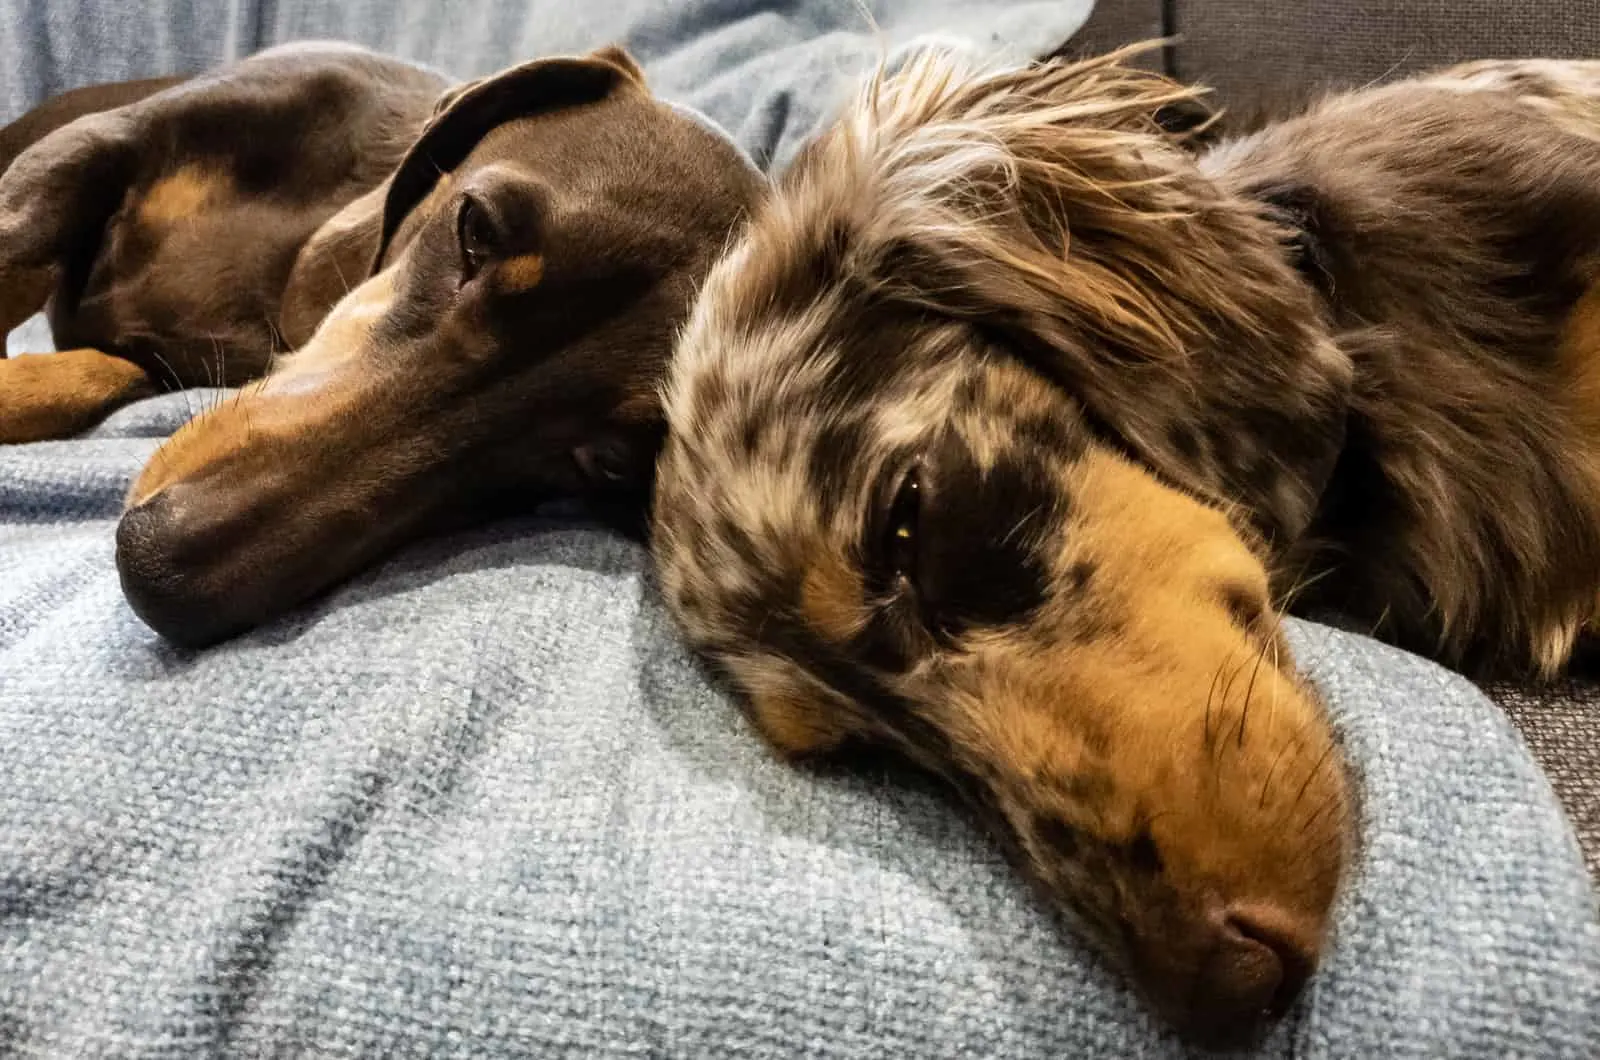 two dachshunds napping